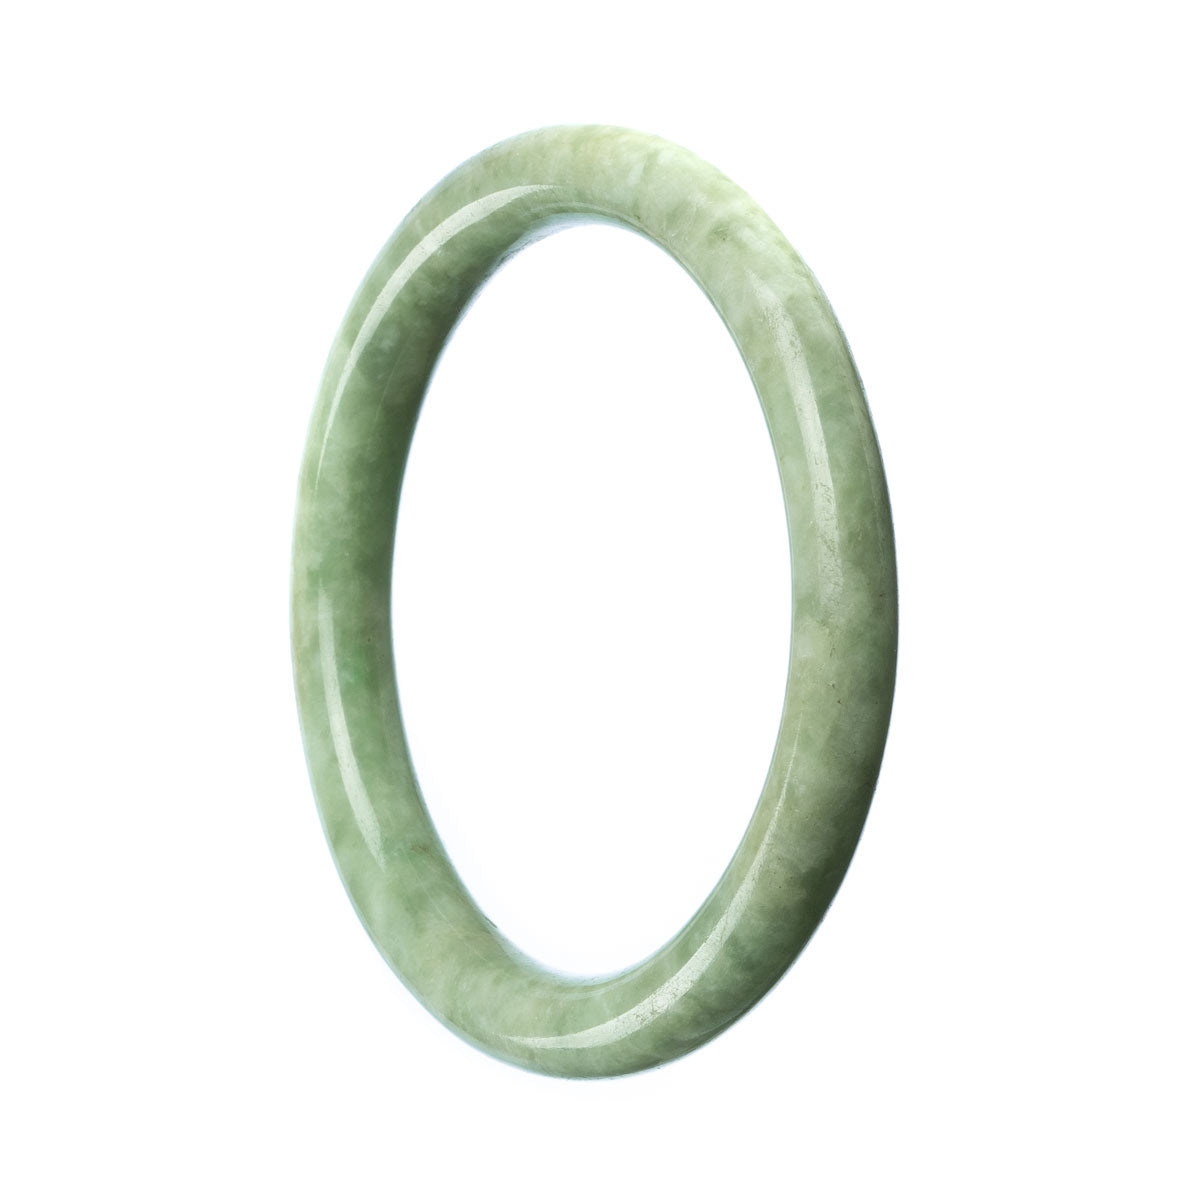 A round Real Grade A Green Traditional Jade Bangle, measuring 59mm in diameter, from MAYS™.